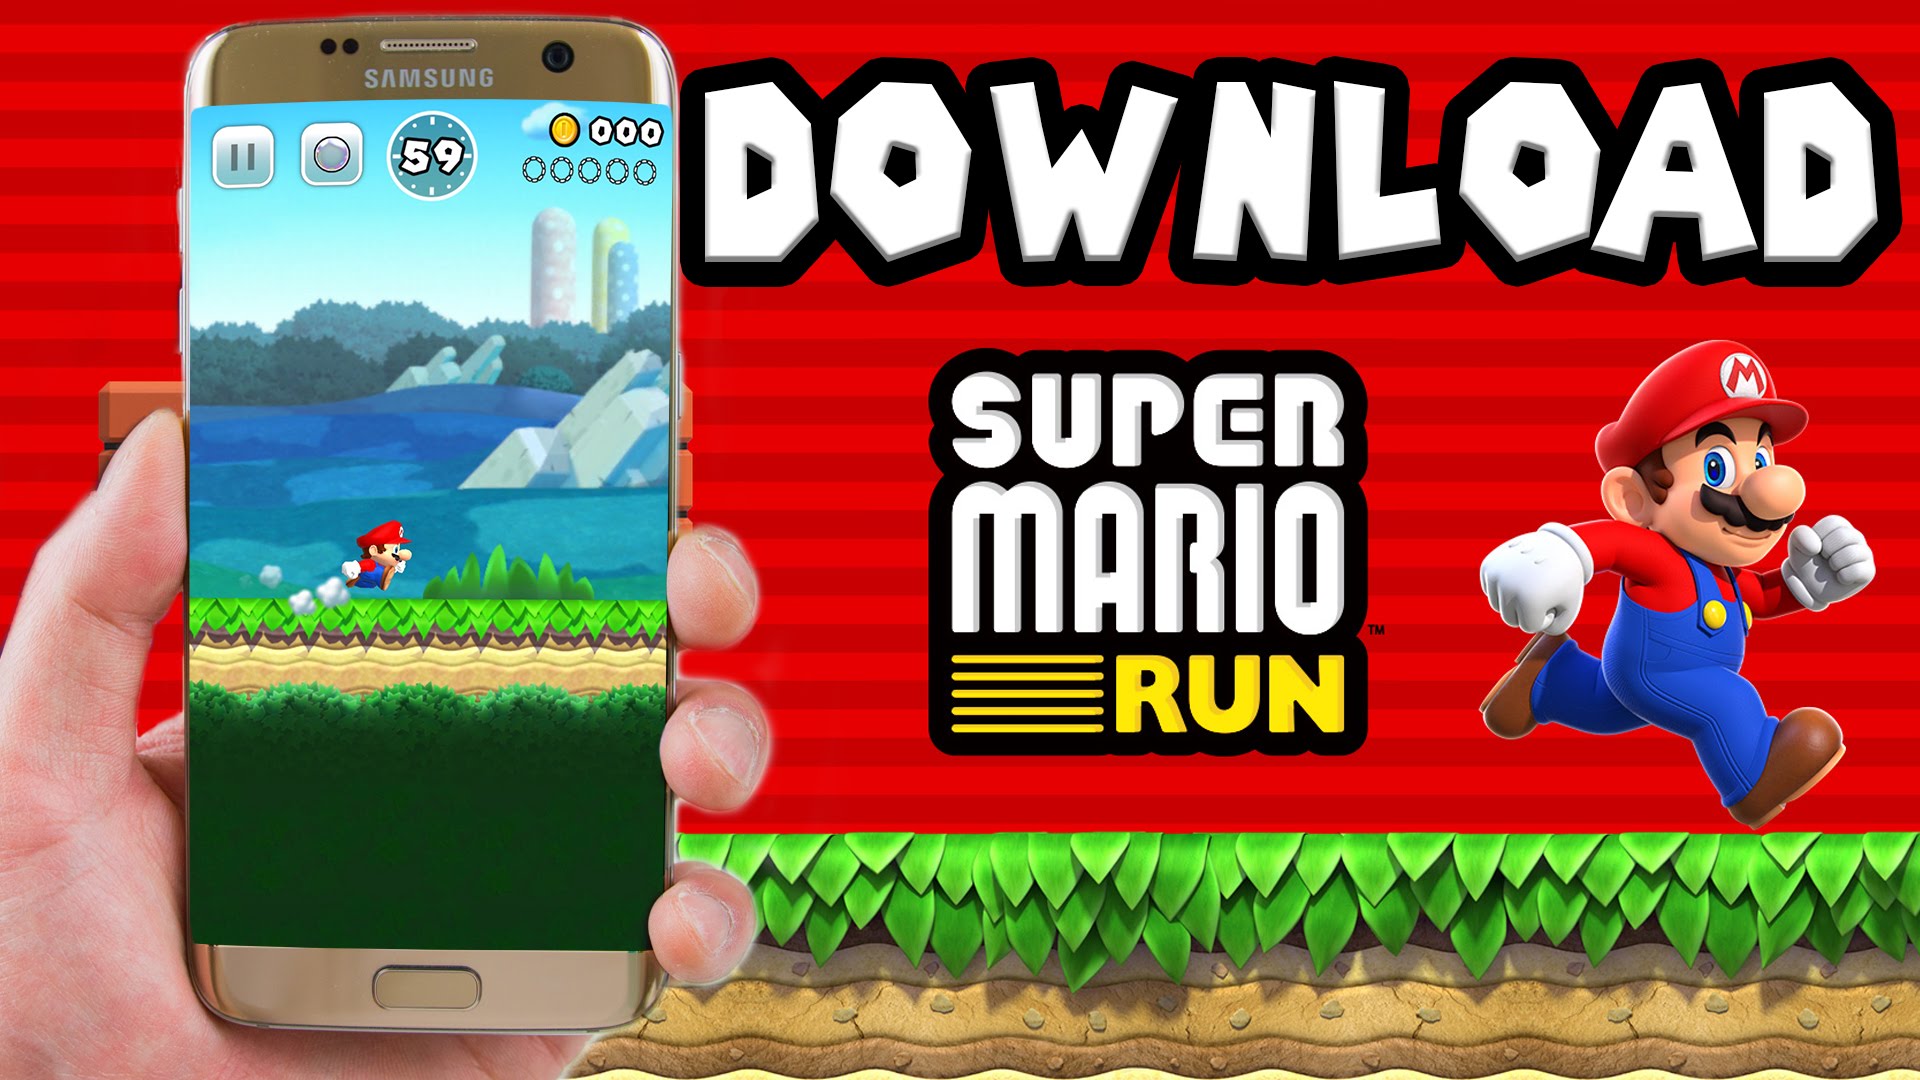 super mario run for android devices on play store